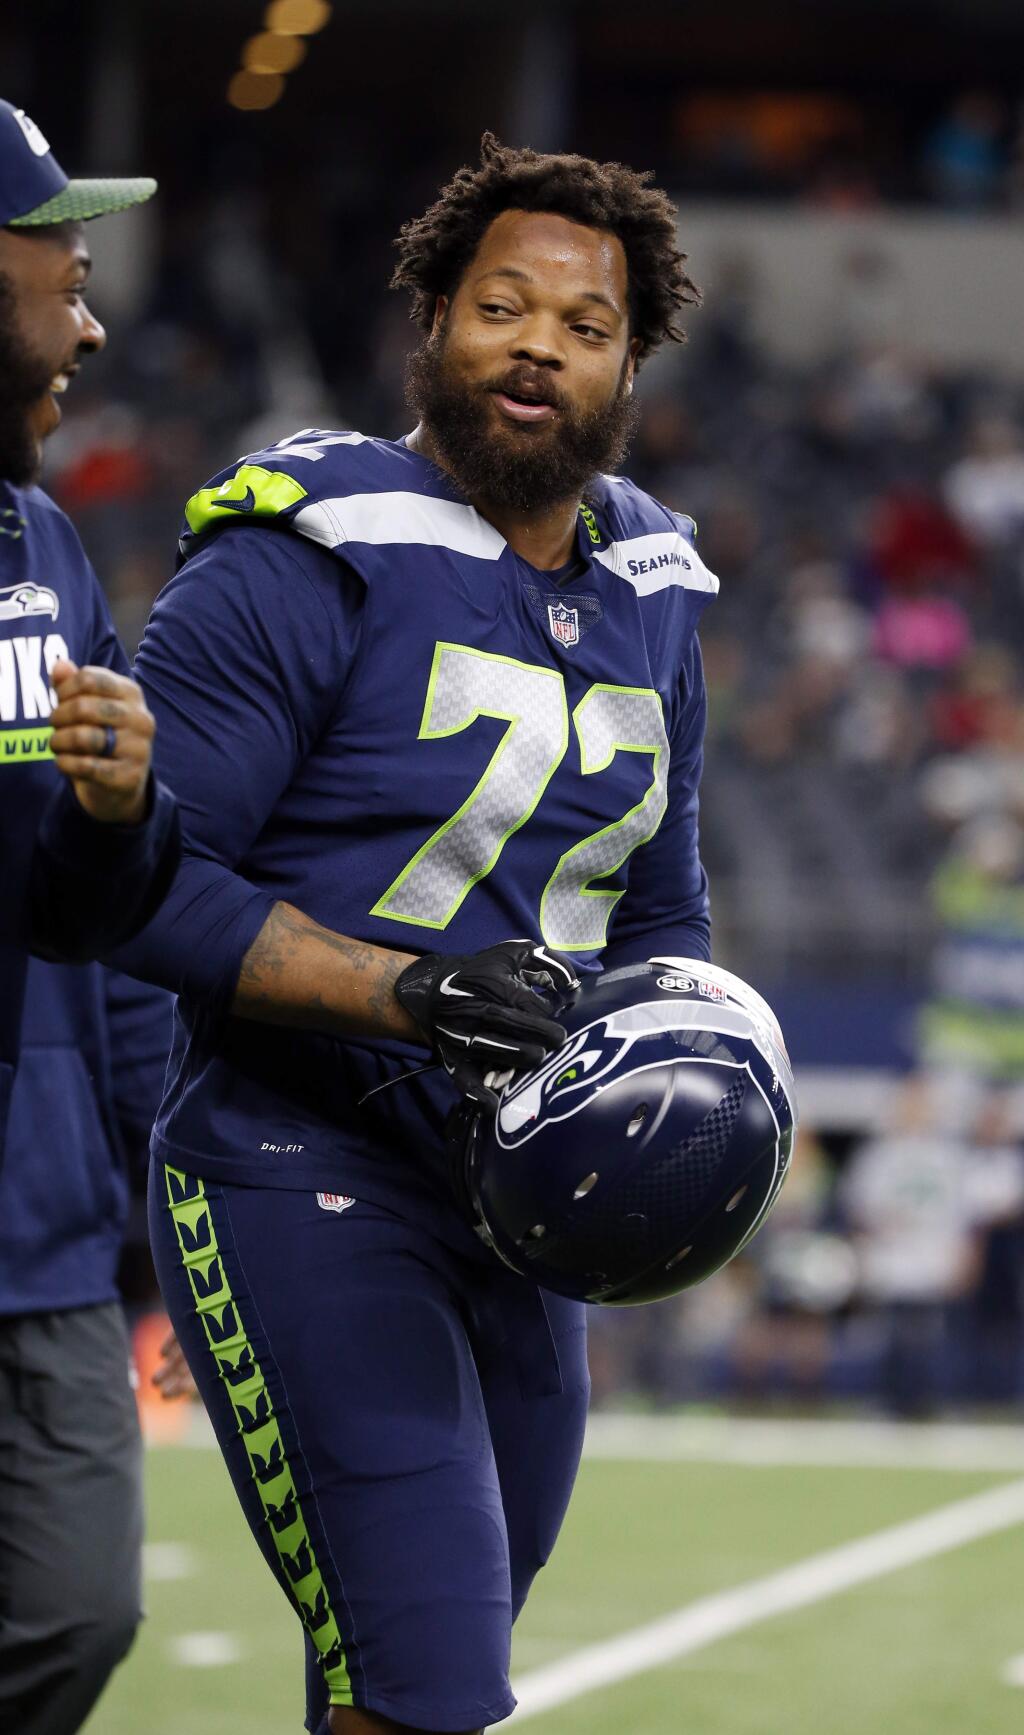 Seattle Seahawks defensive end Michael Bennett walks on the field prior to a game against the Dallas Cowboys, Sunday, Dec. 24, 2017, in Arlington, Texas. (AP Photo/Michael Ainsworth)